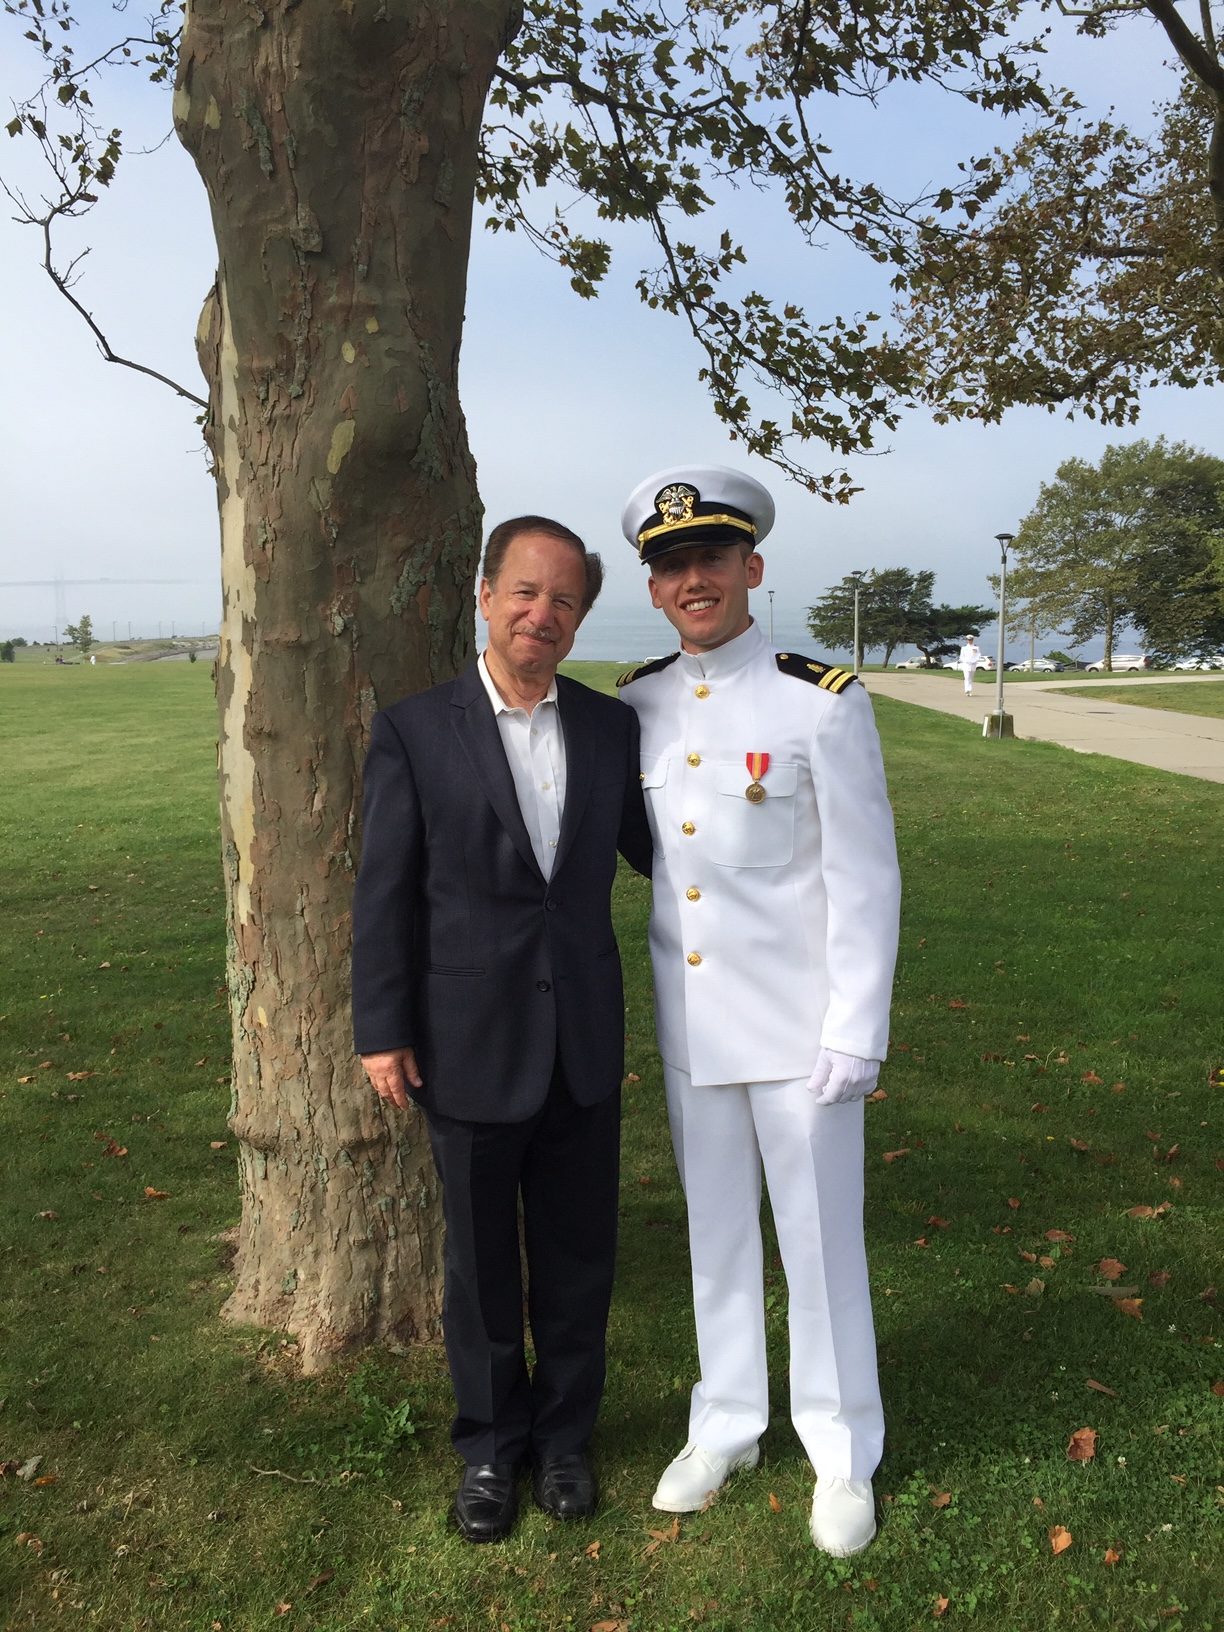 Dr. Gluskin and his son Adam at his Naval officer graduation in Newport, R.I.